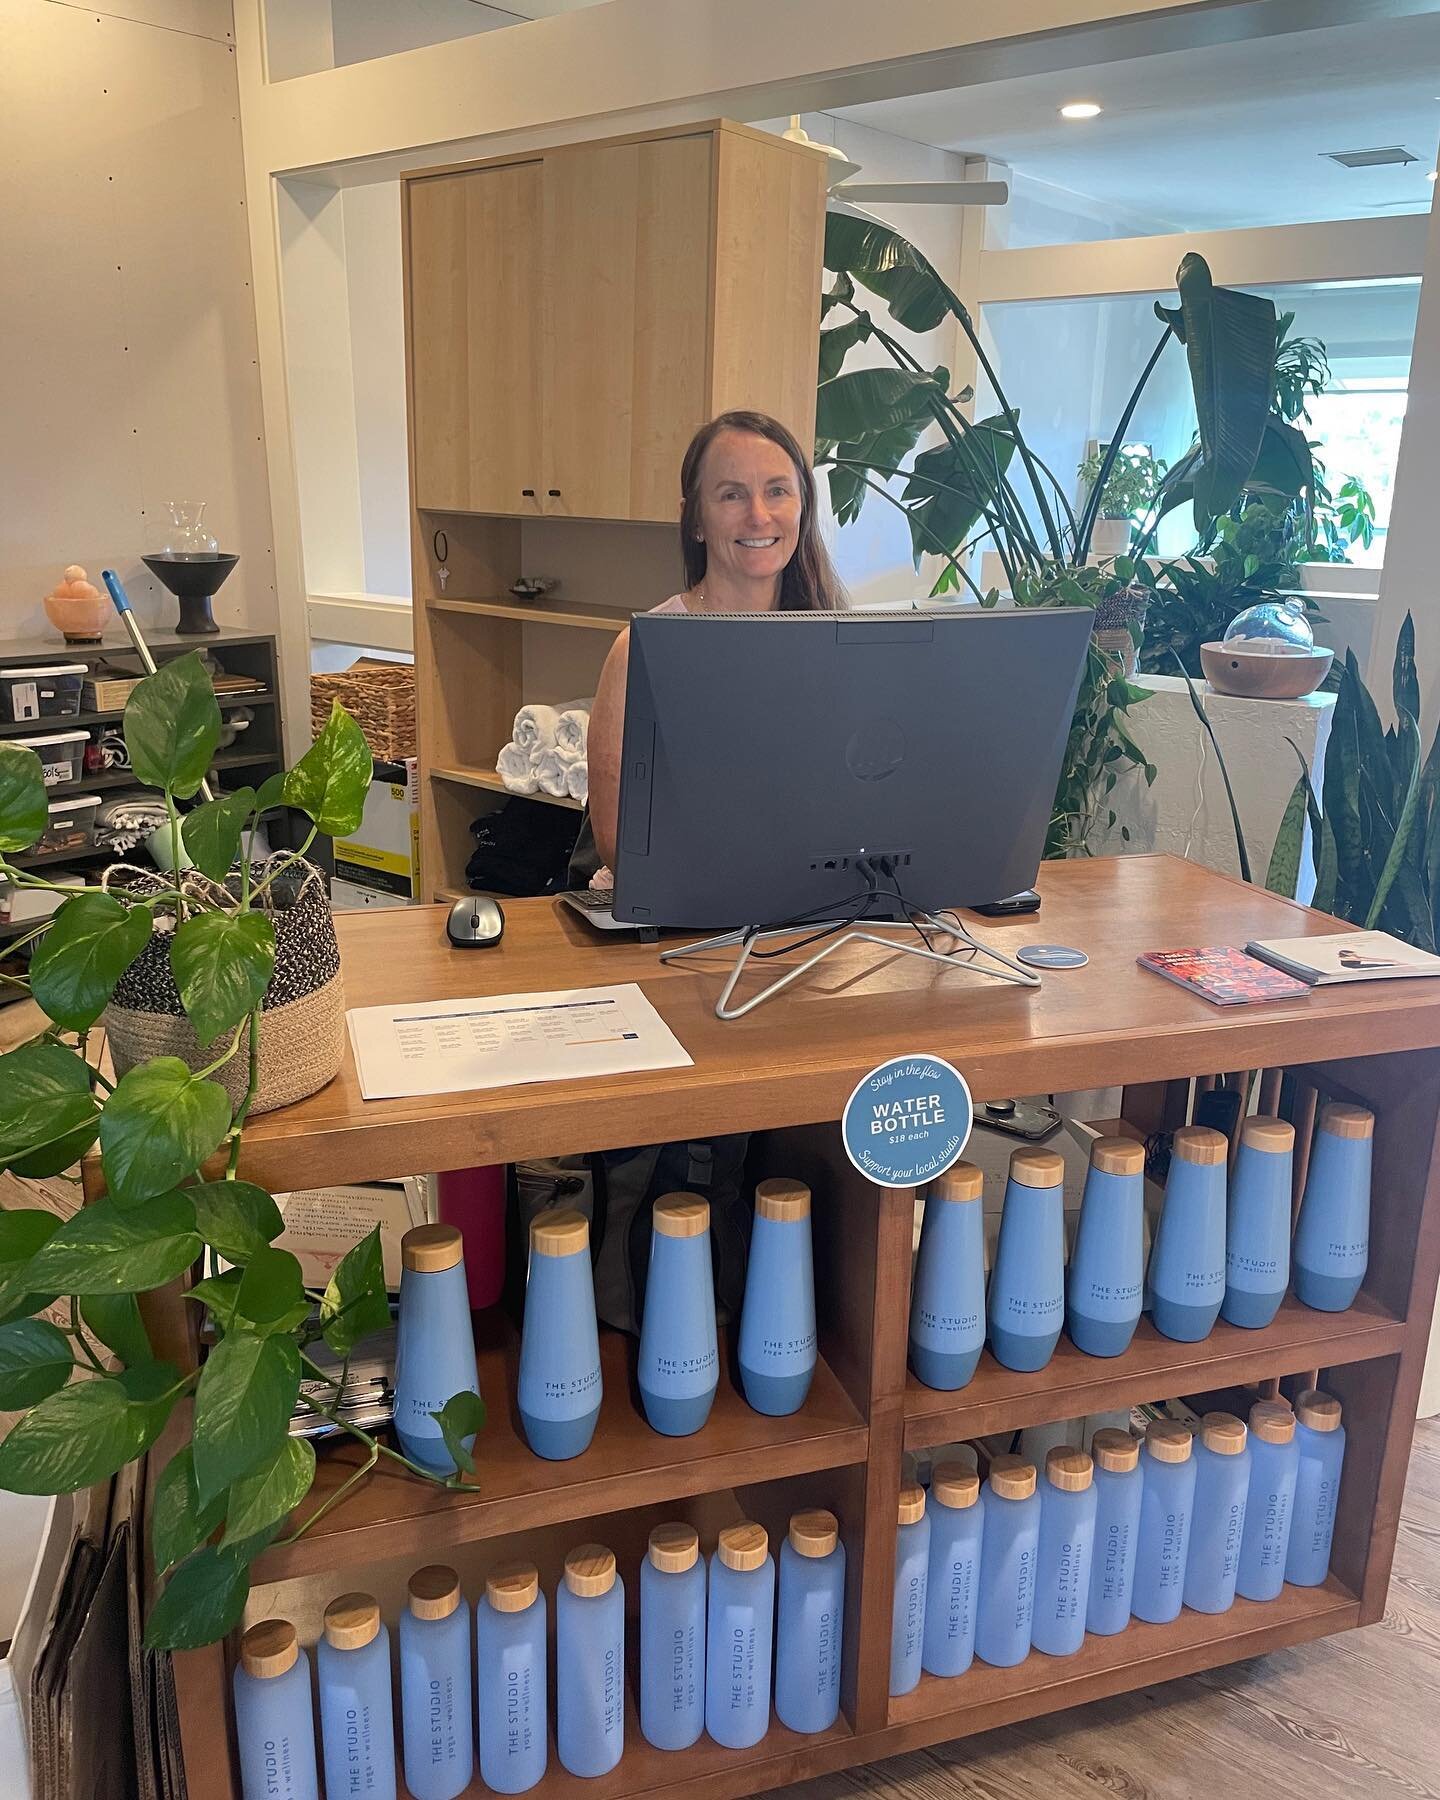 We&rsquo;re hiring ! Join The Studio front desk team. Have fun, meet our amazing community of students and instructors and enjoy *free* yoga classes 🧘&zwj;♀️ for more info email info@thestudiomillvalley.com.  Refer a friend and you&rsquo;ll receive 